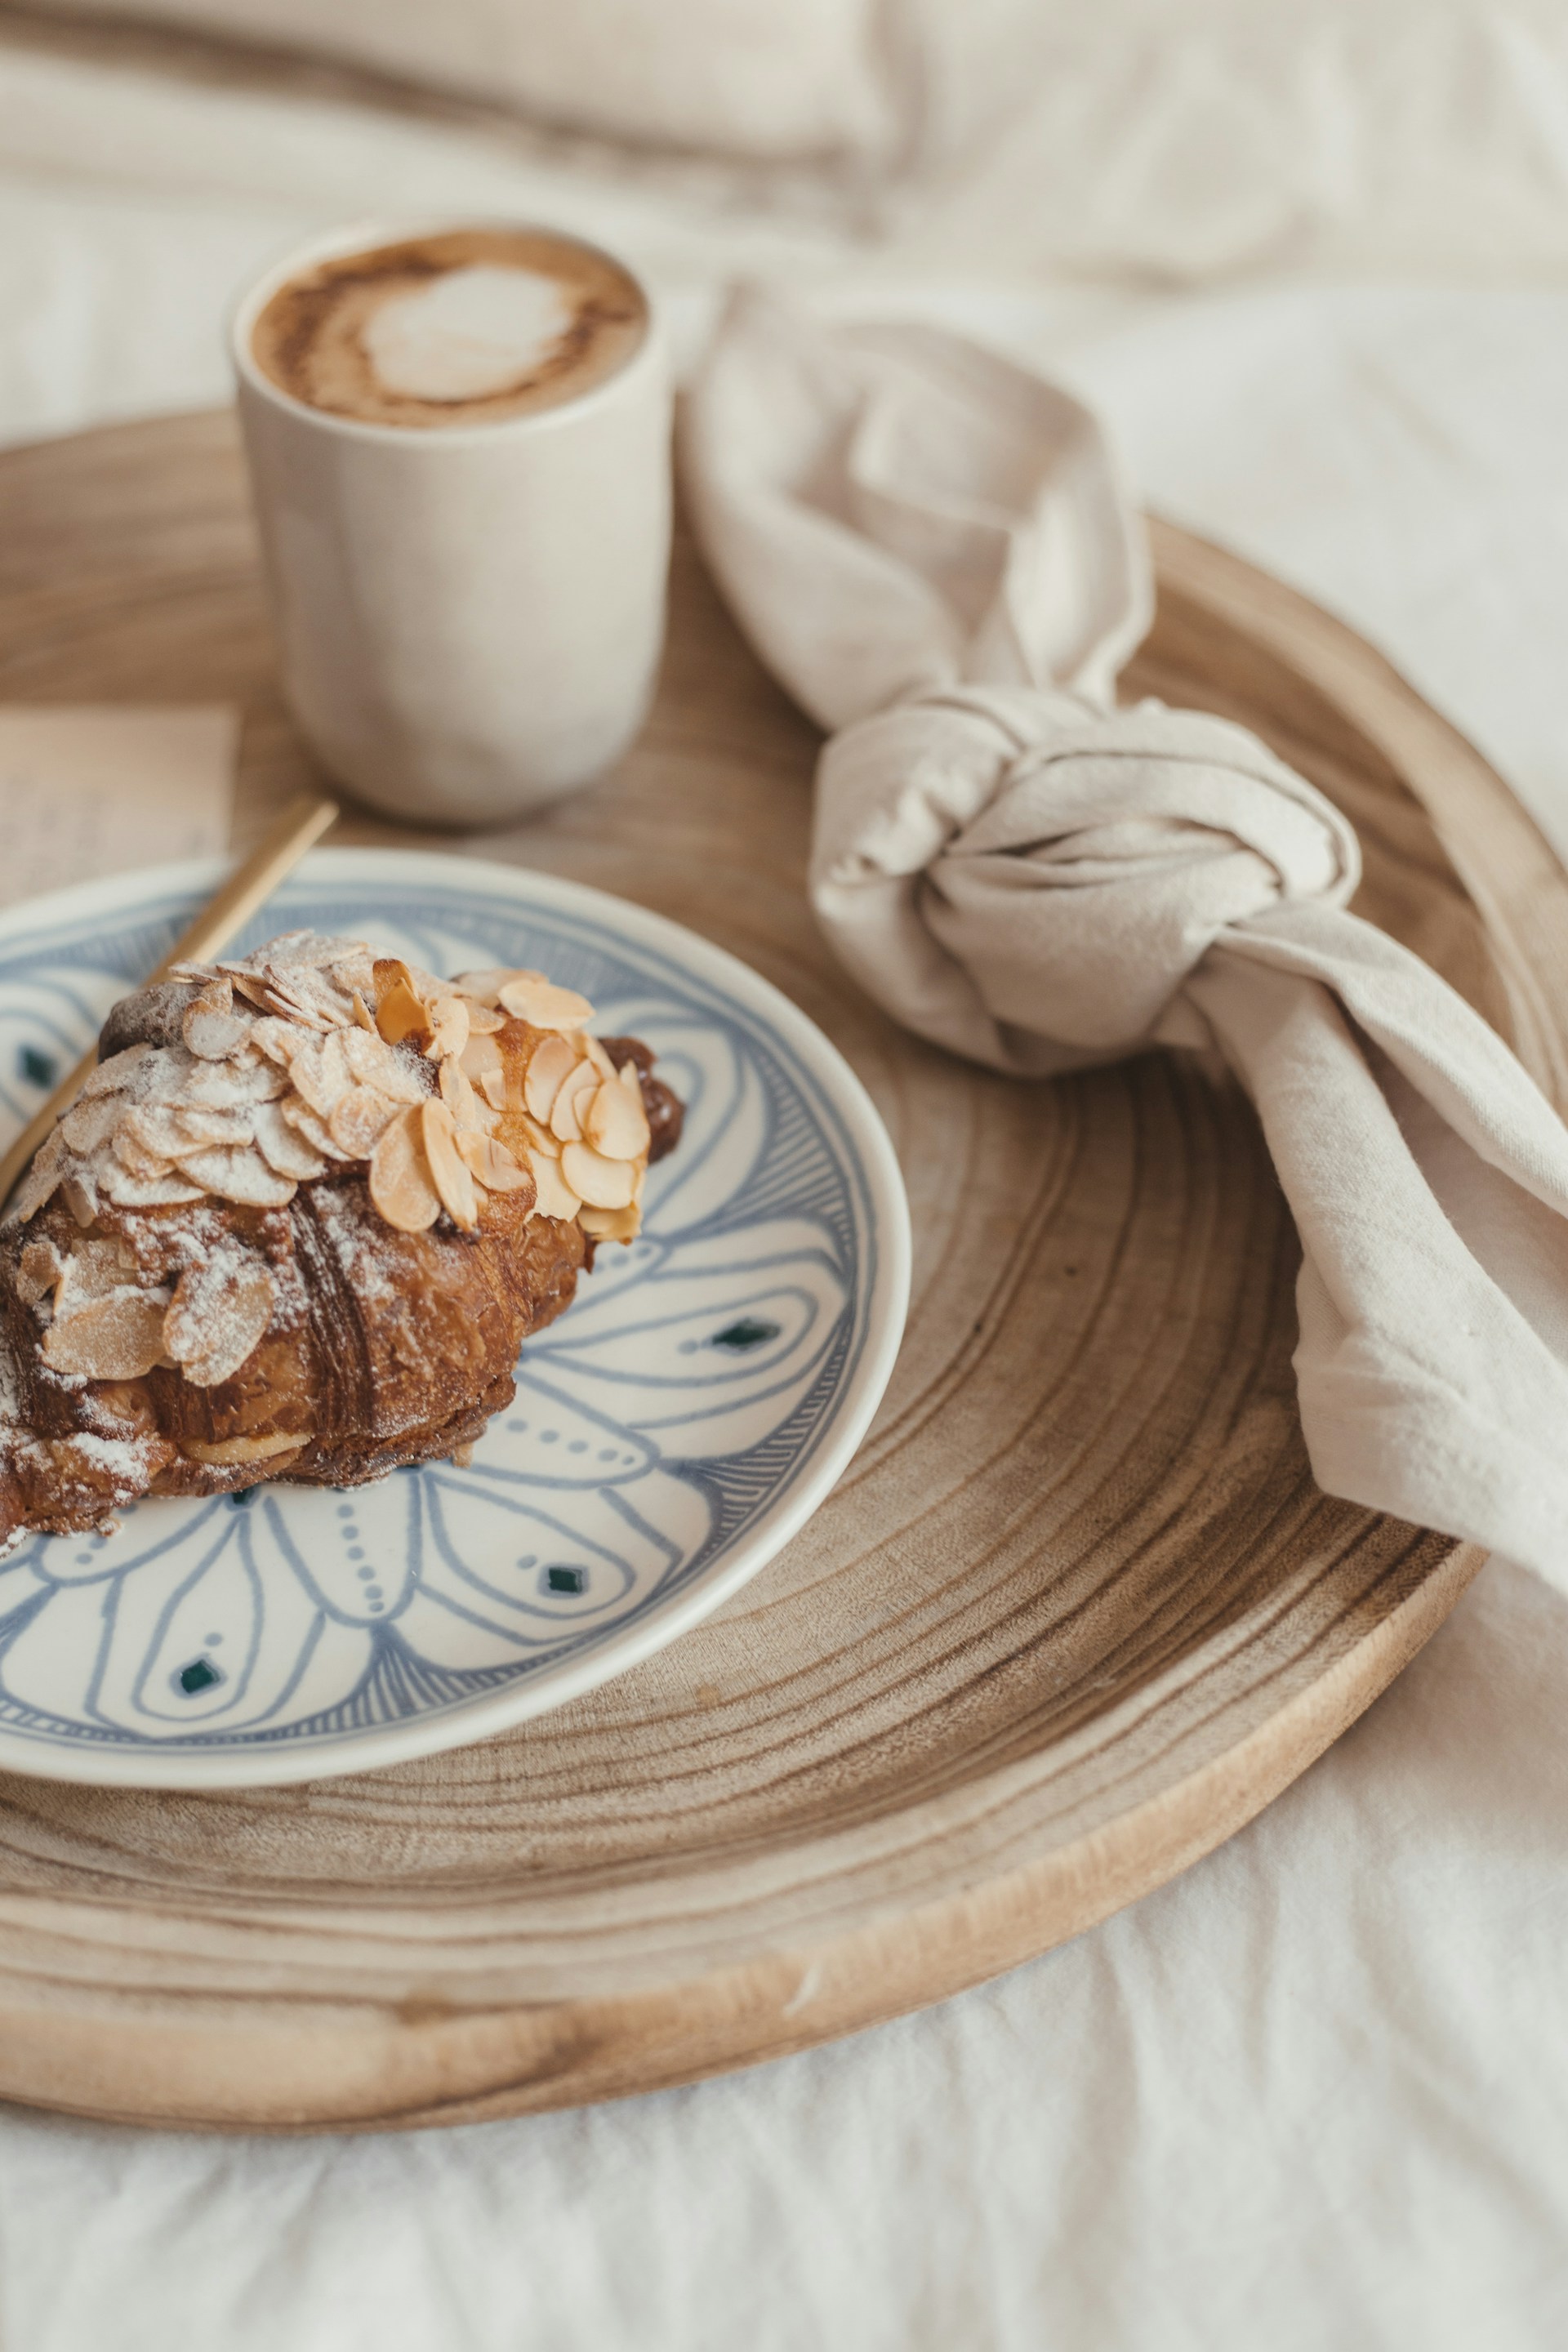 A croissant and coffee on a table | Source: Unsplash